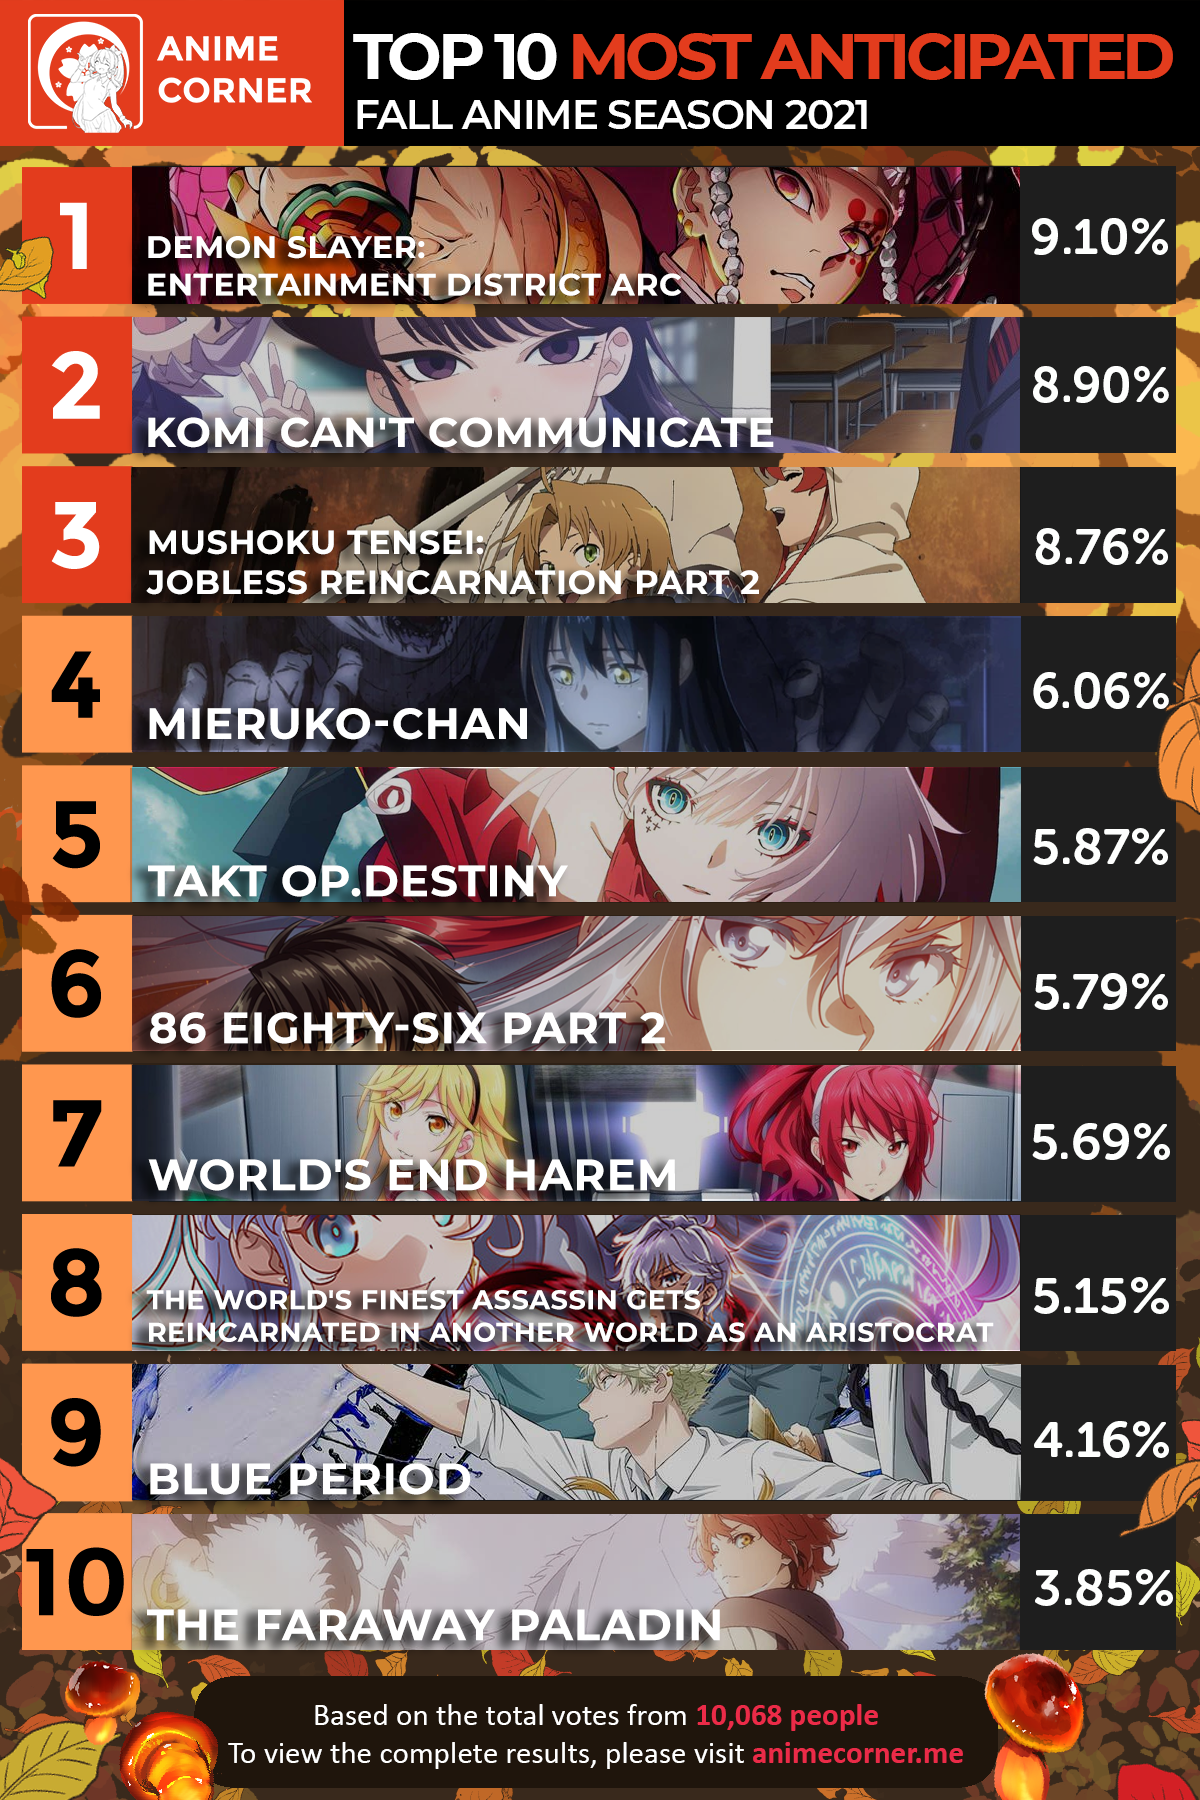 10 Best Anime of 2021 and 2022 - Top Anime to Watch-demhanvico.com.vn